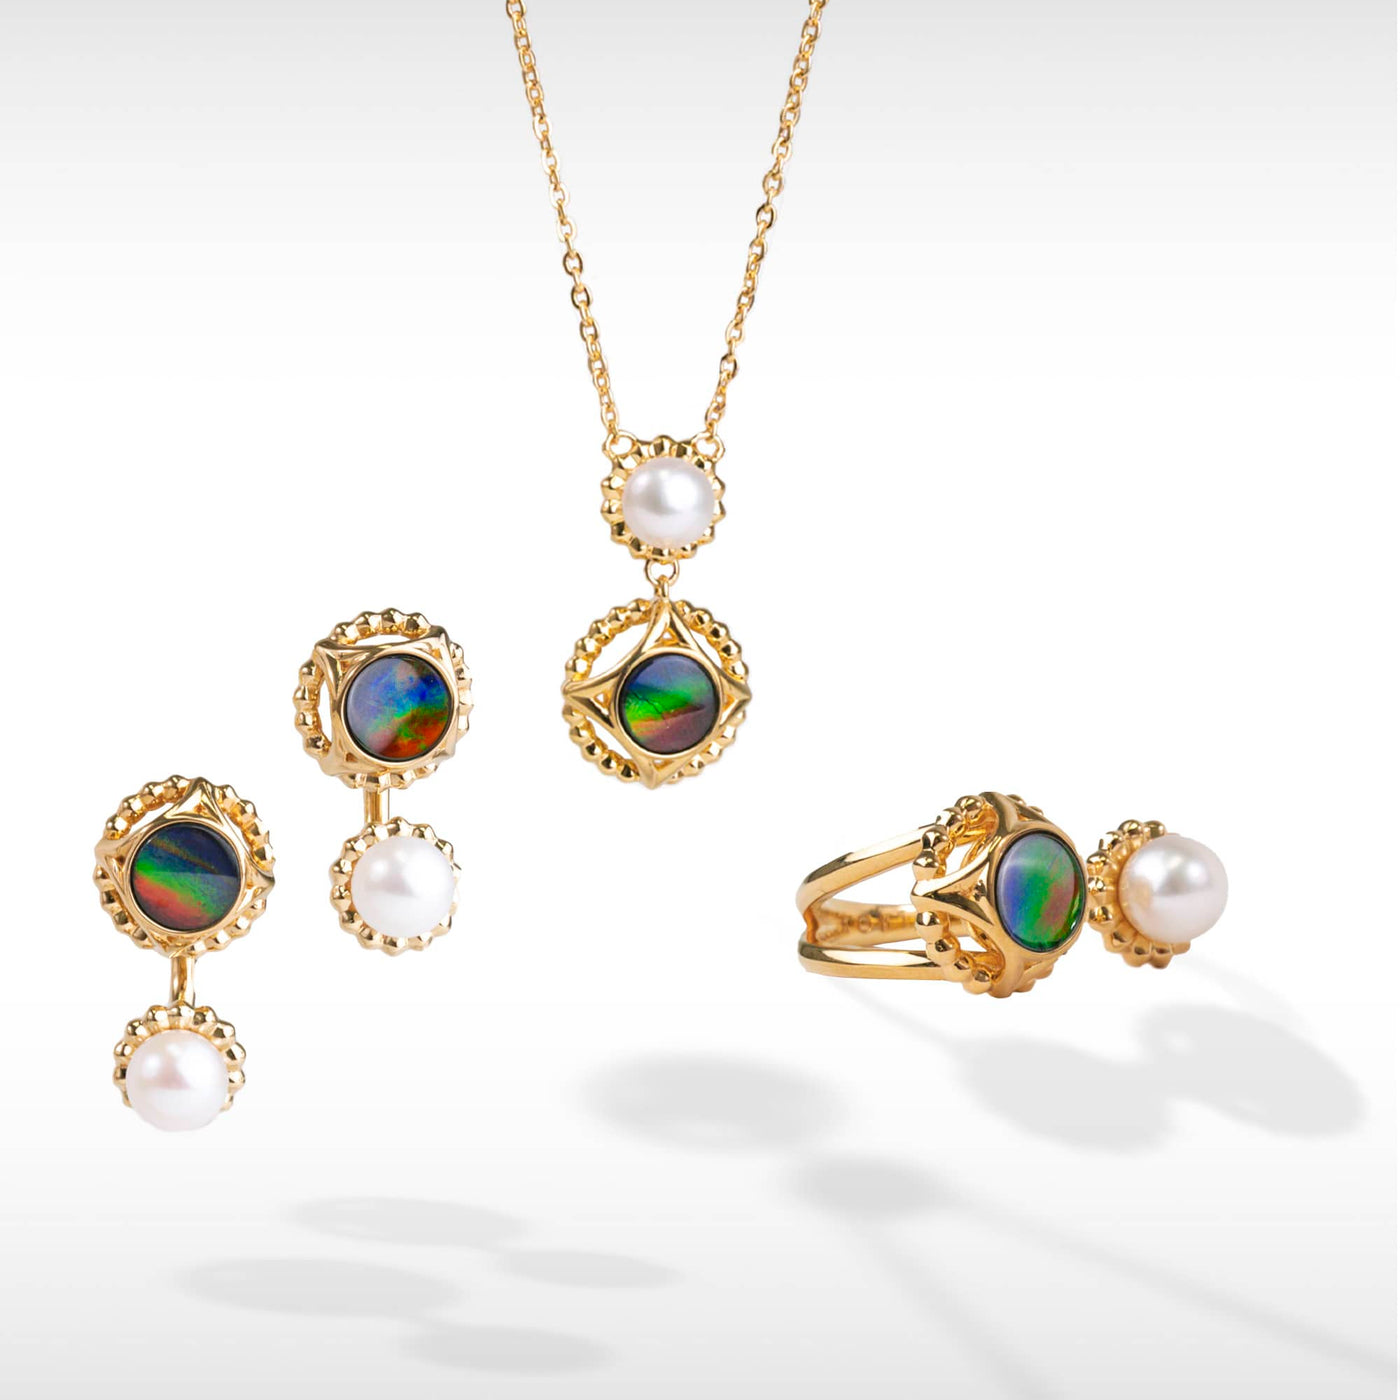 Pearl ammolite pendant, earring and ring set in 18K gold plating